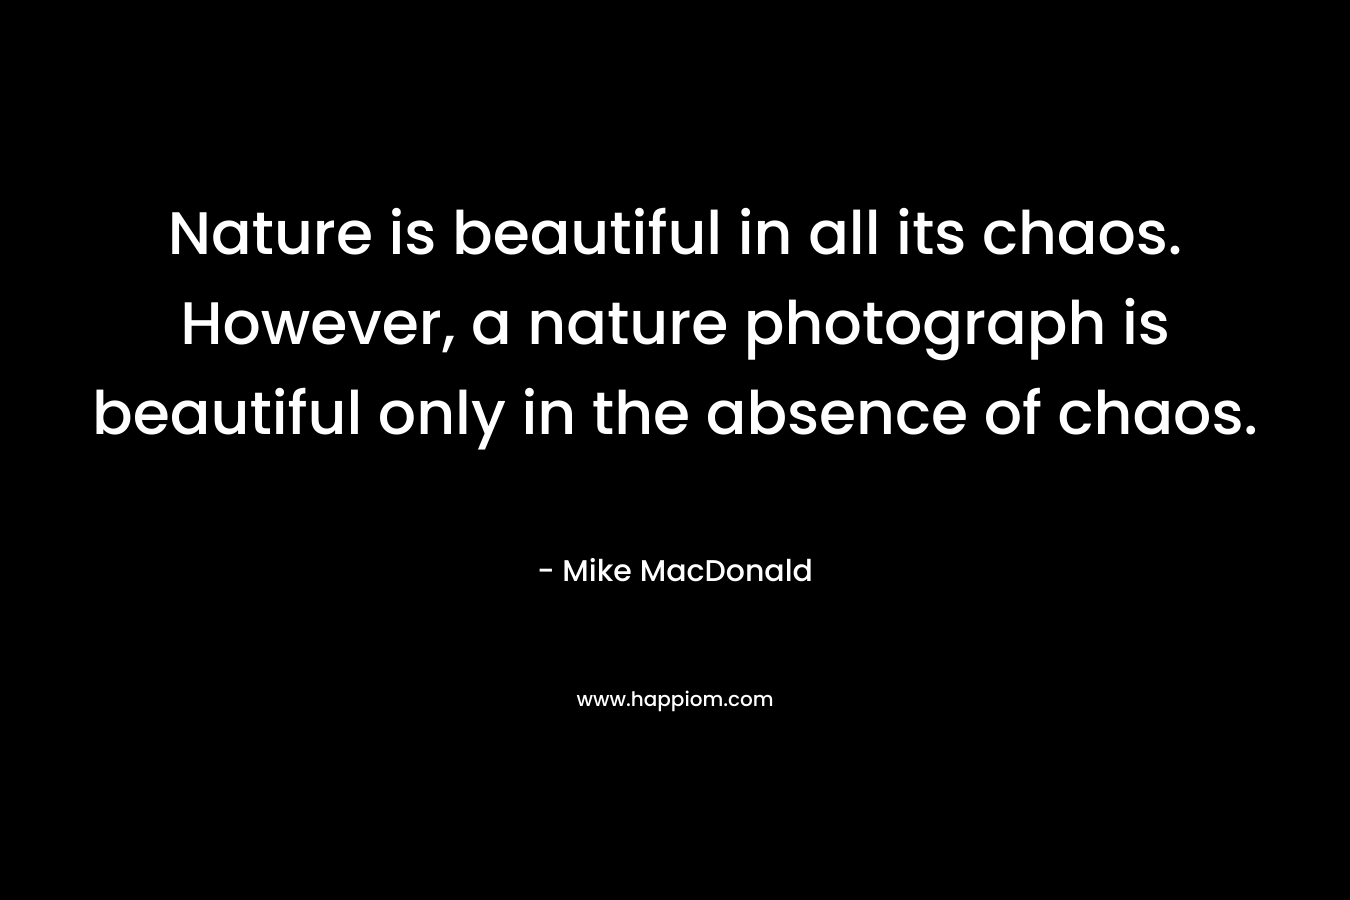 Nature is beautiful in all its chaos. However, a nature photograph is beautiful only in the absence of chaos.